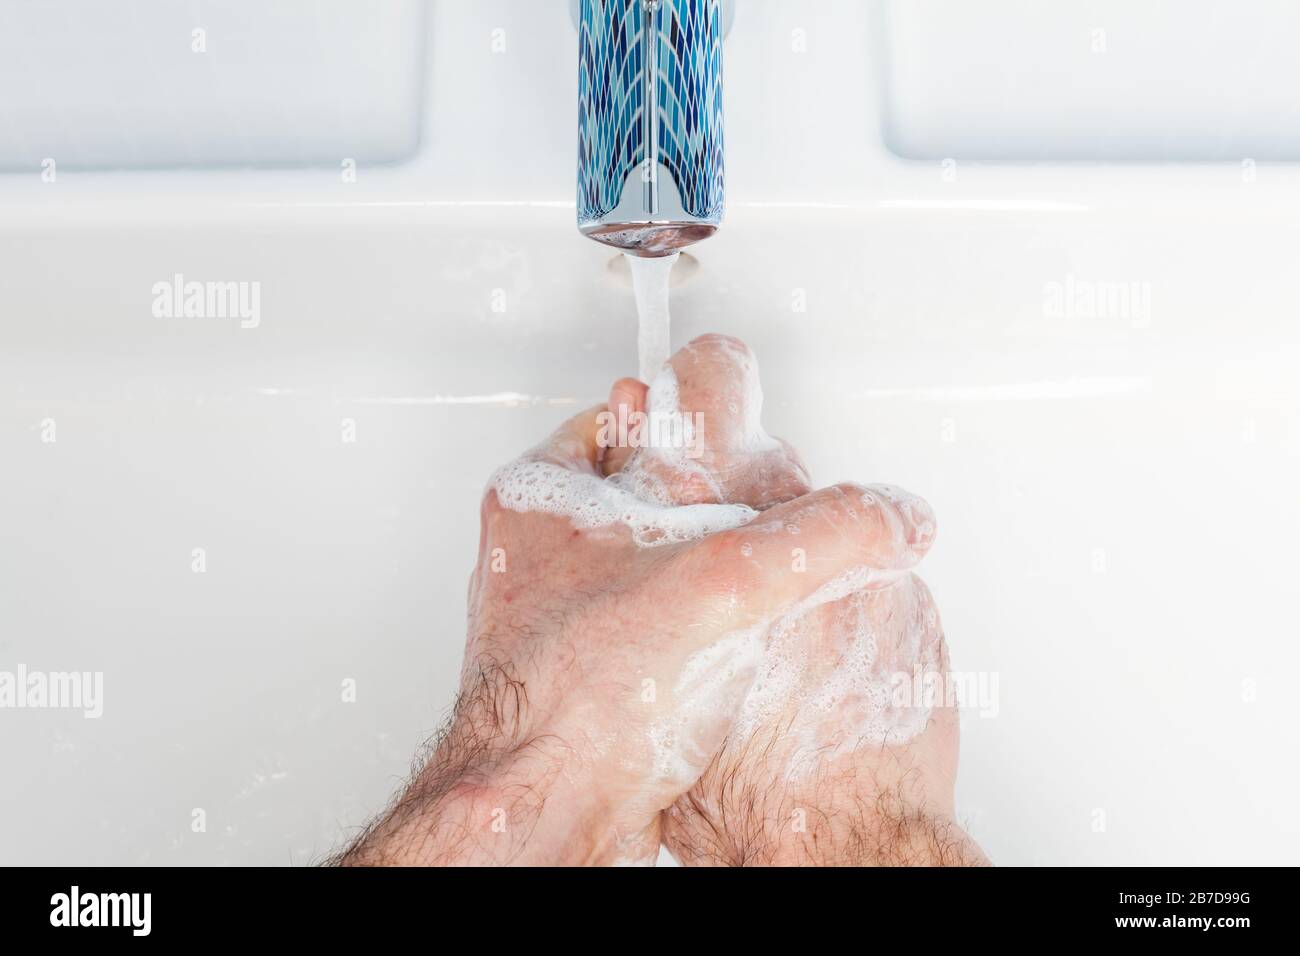 Man washing hands with antibacterial soap and water performing basic protective measures against spreading of coronavirus epidemy Stock Photo